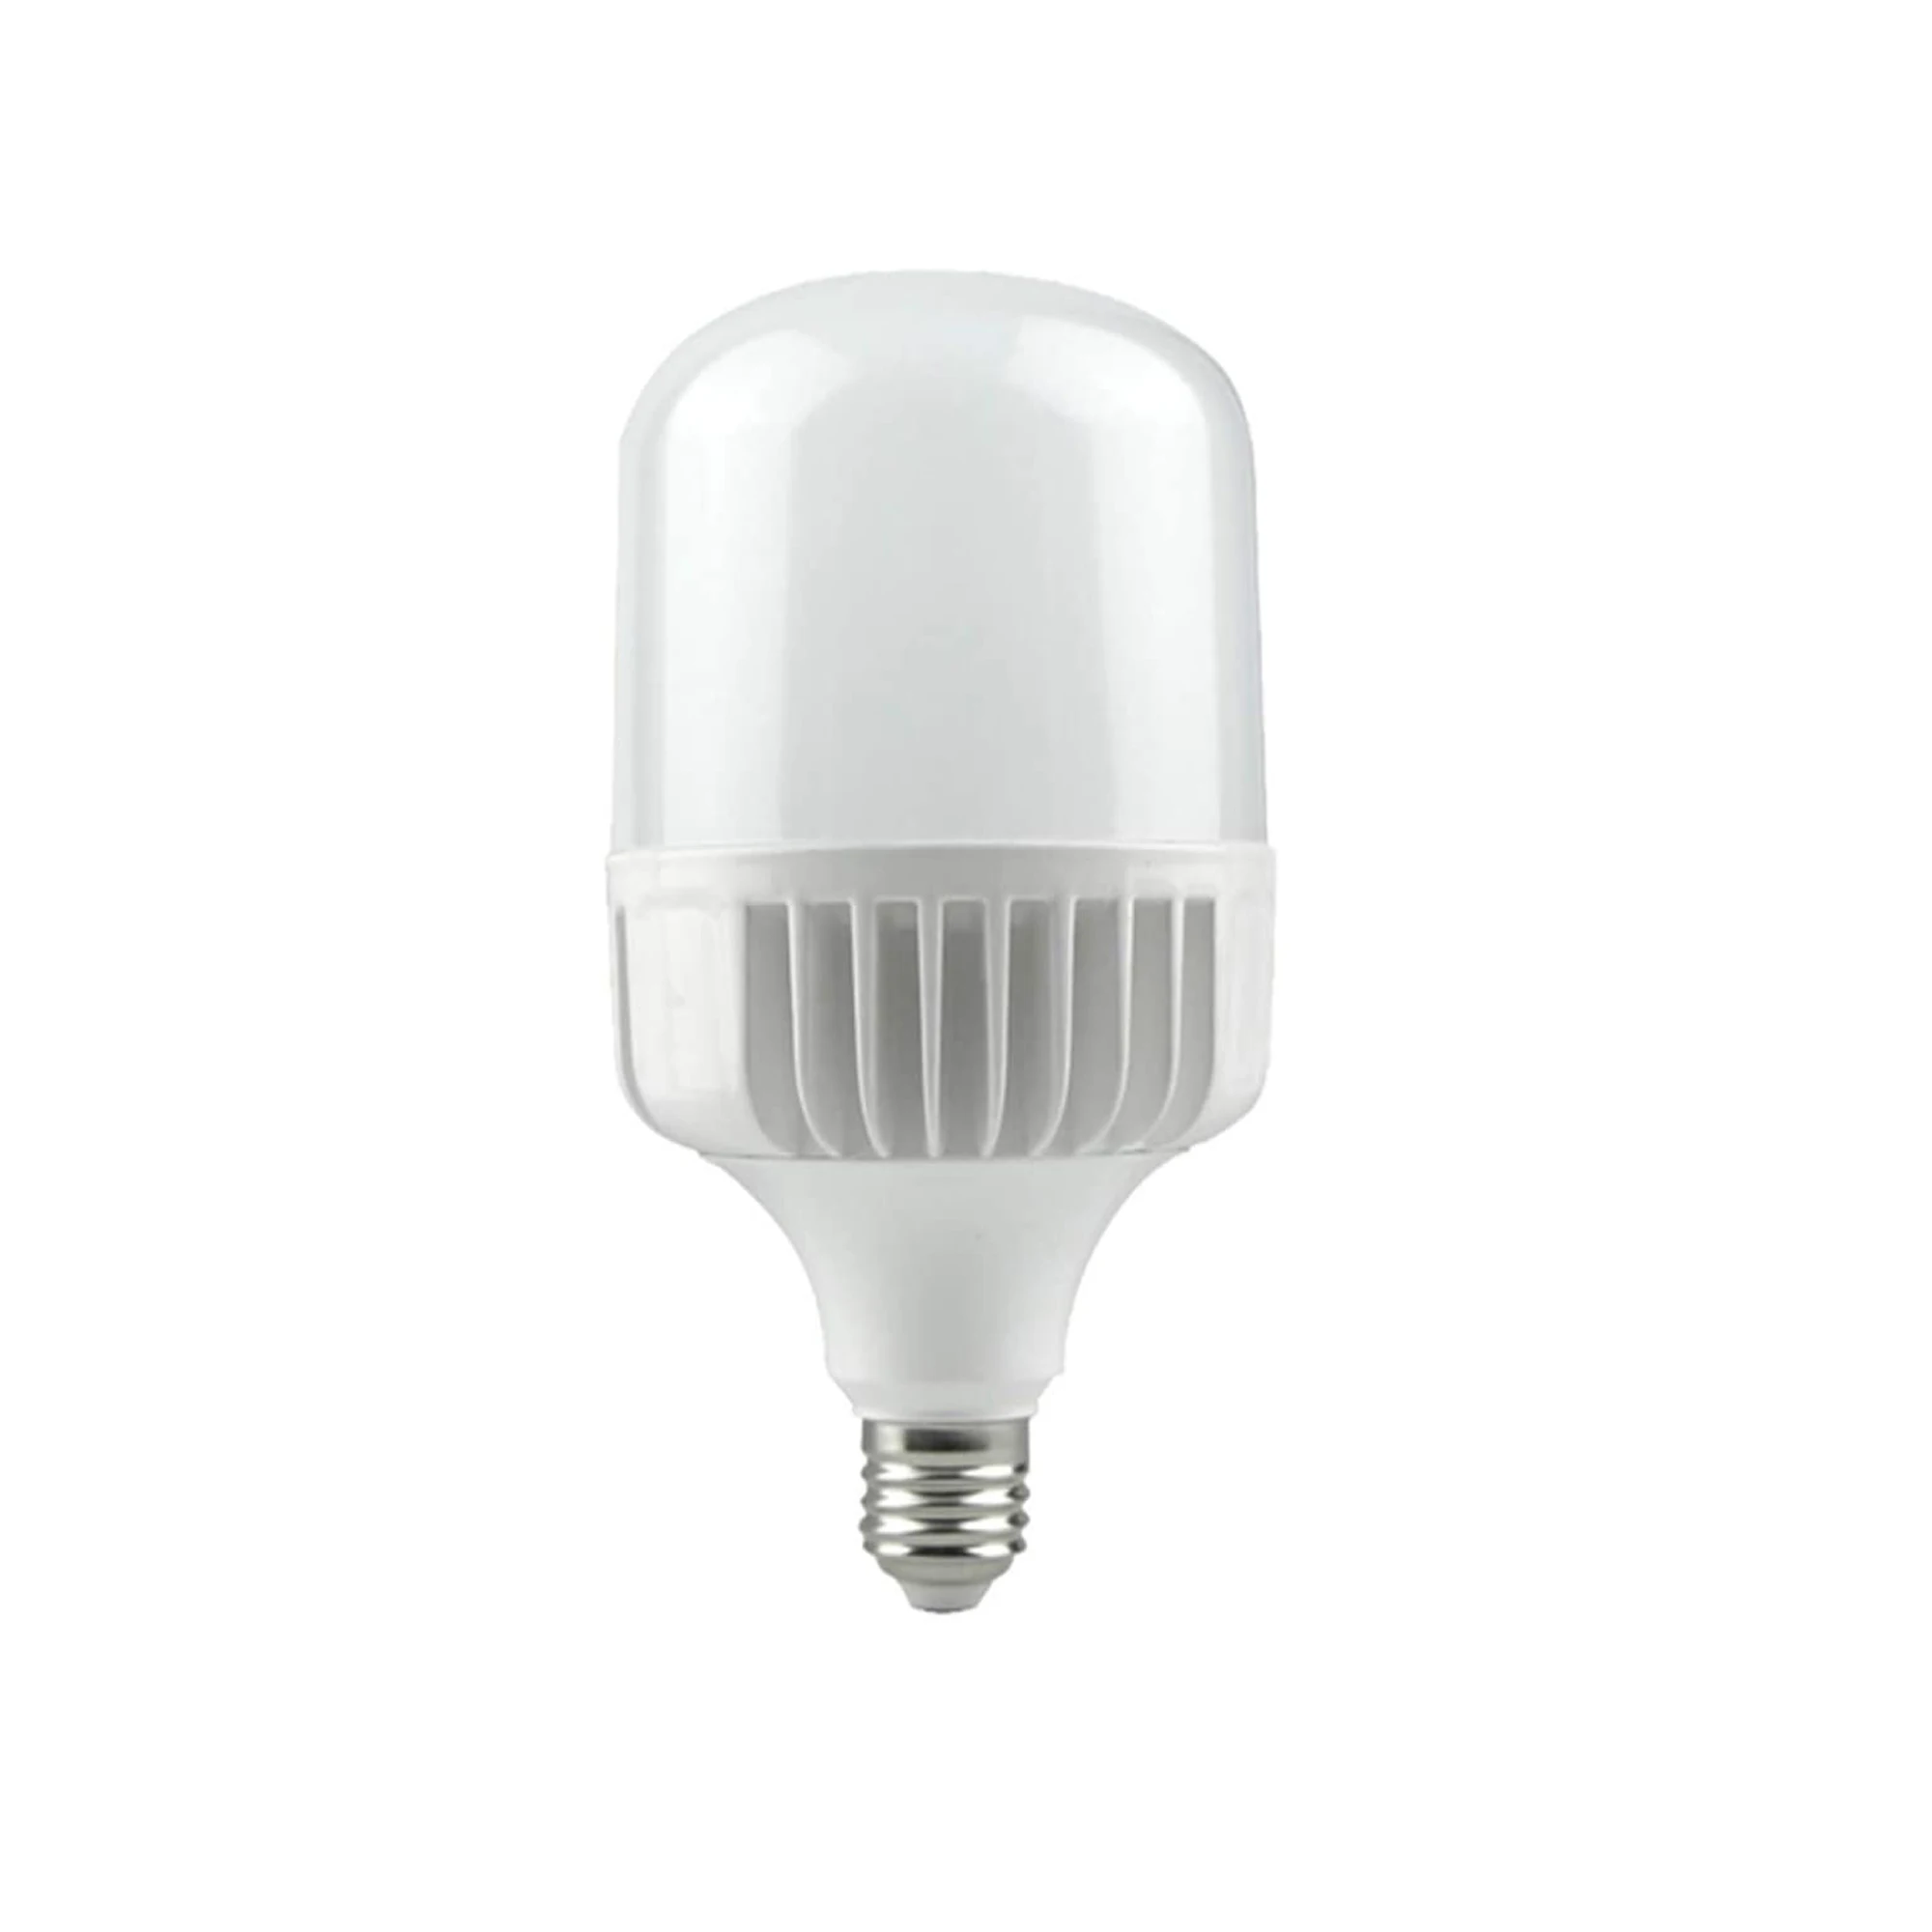 LED High Output 35W 4000lm (250W-350W) Commercial & Residential Bulb, Warm White (3000K), 330 Degree, Non-Dimmable